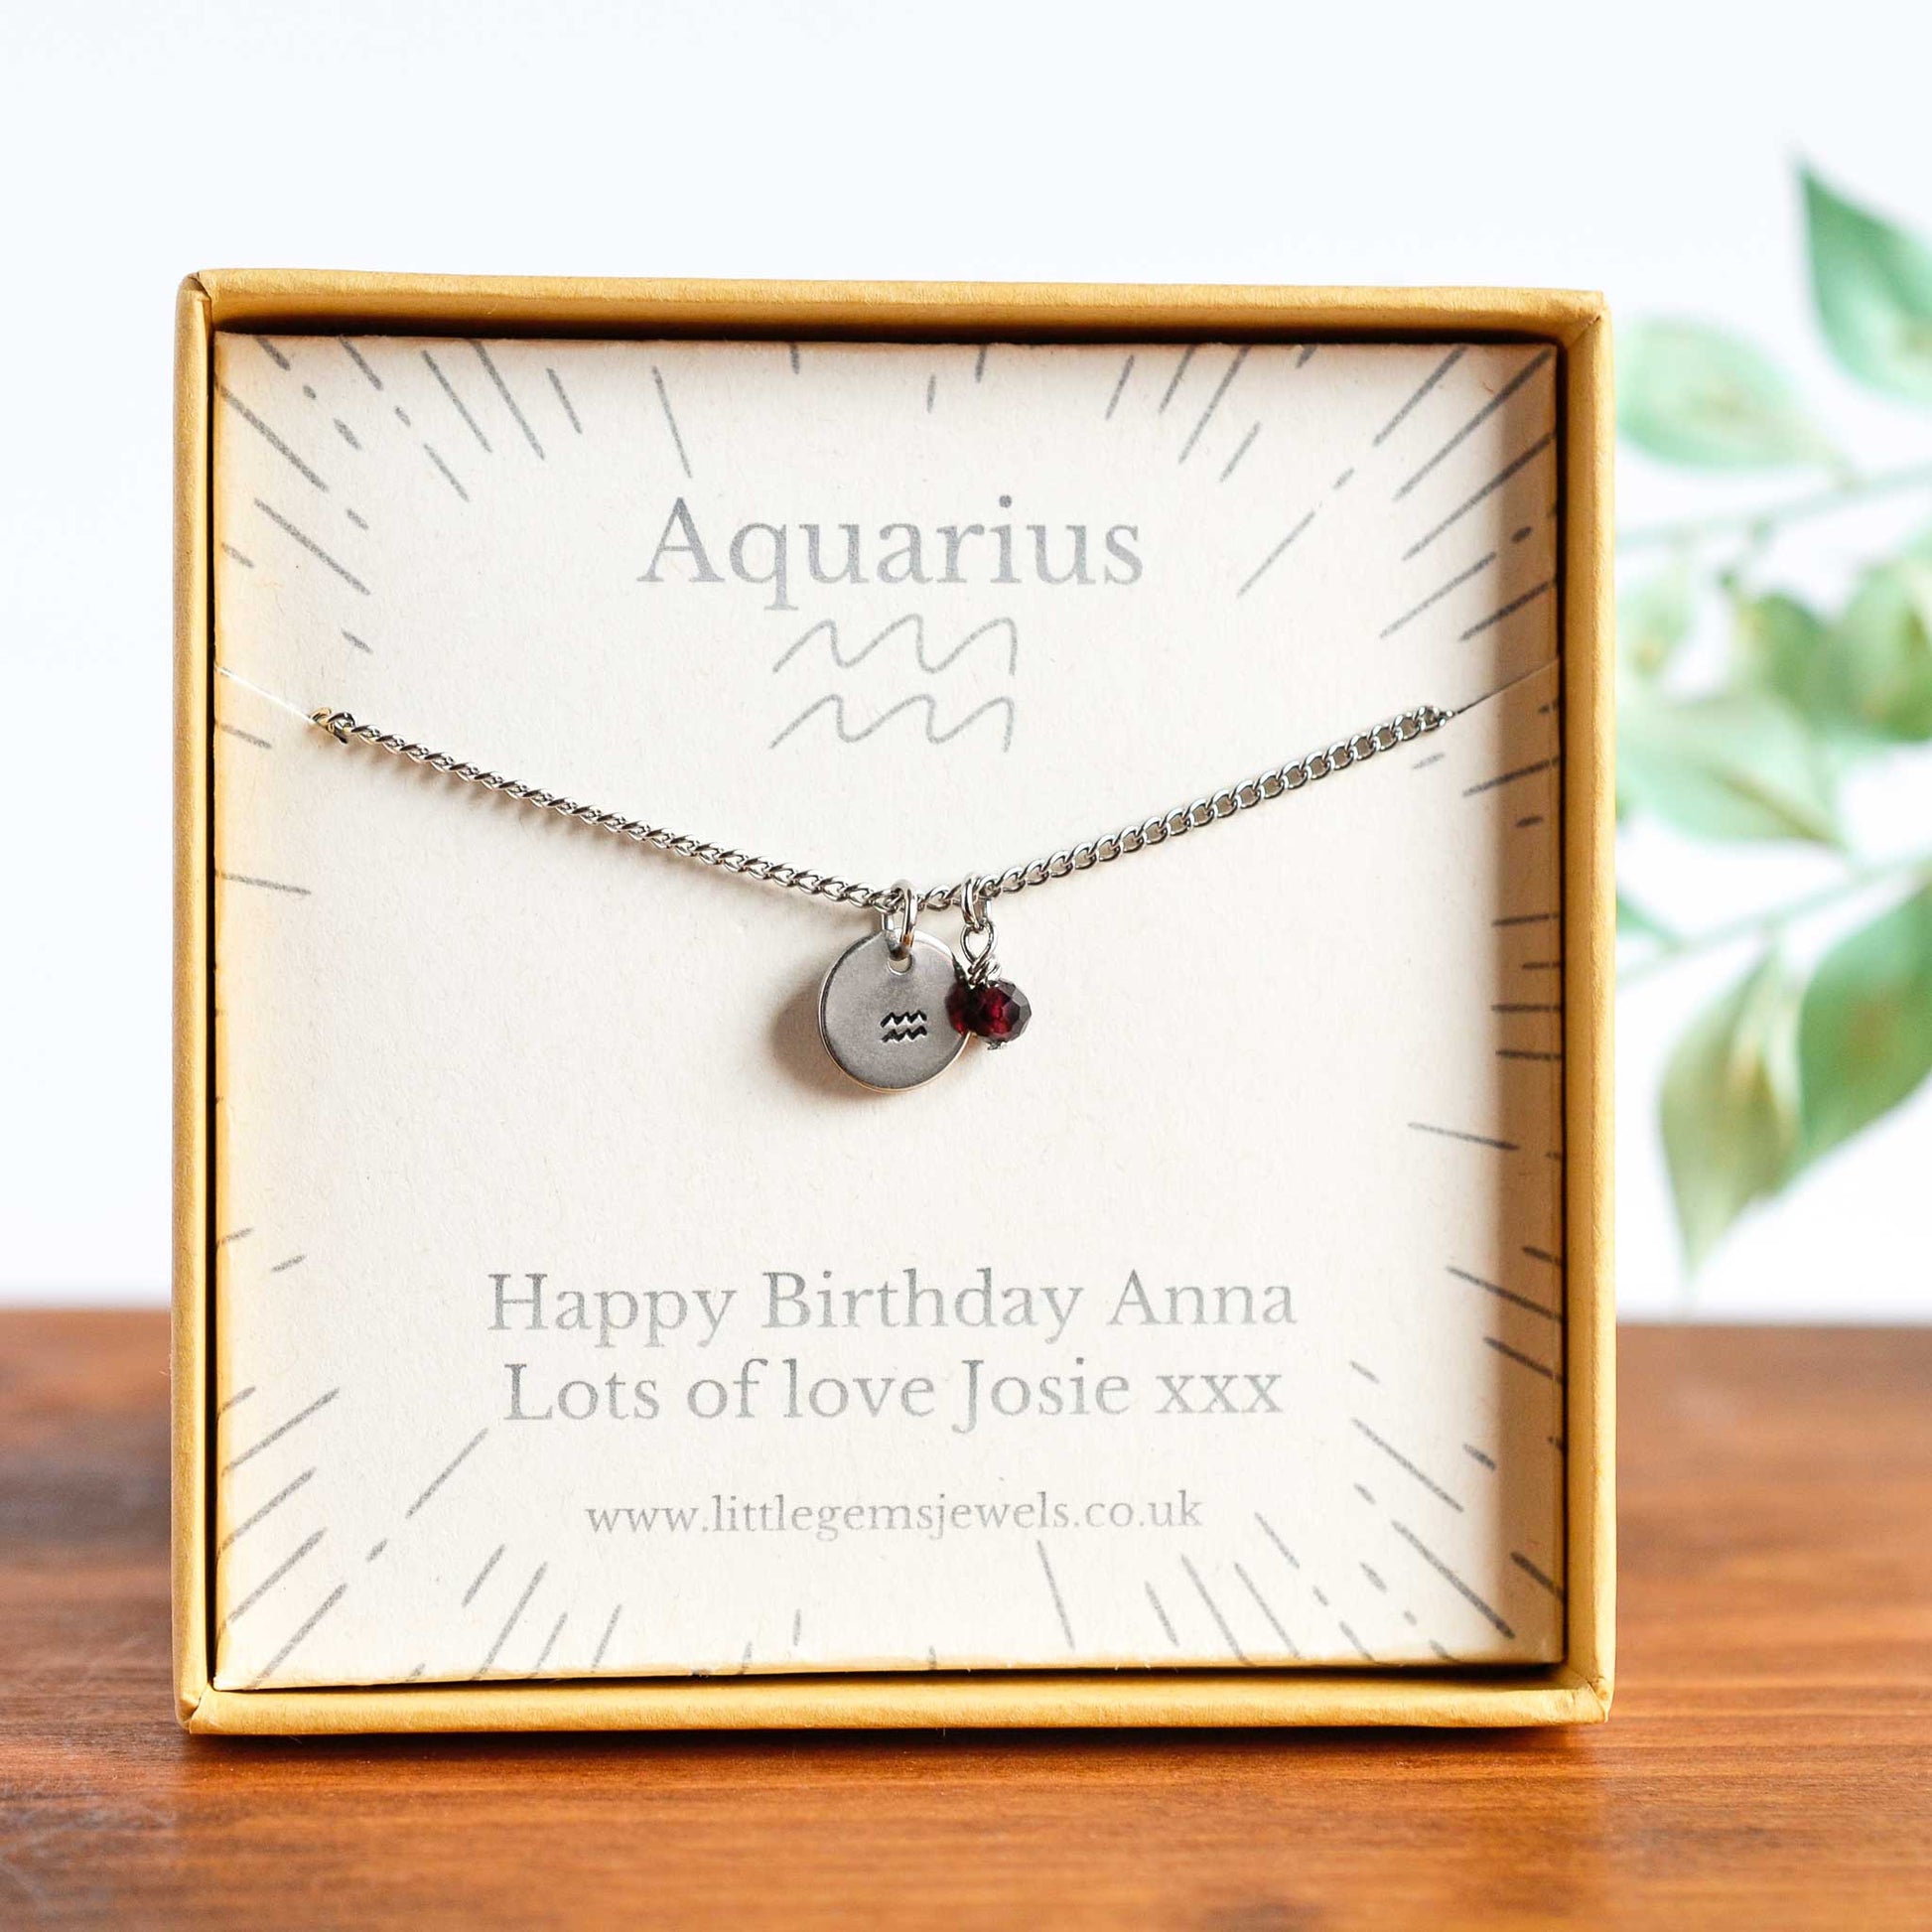 Aquarius Zodiac necklace with personalised gift message in eco friendly gift box